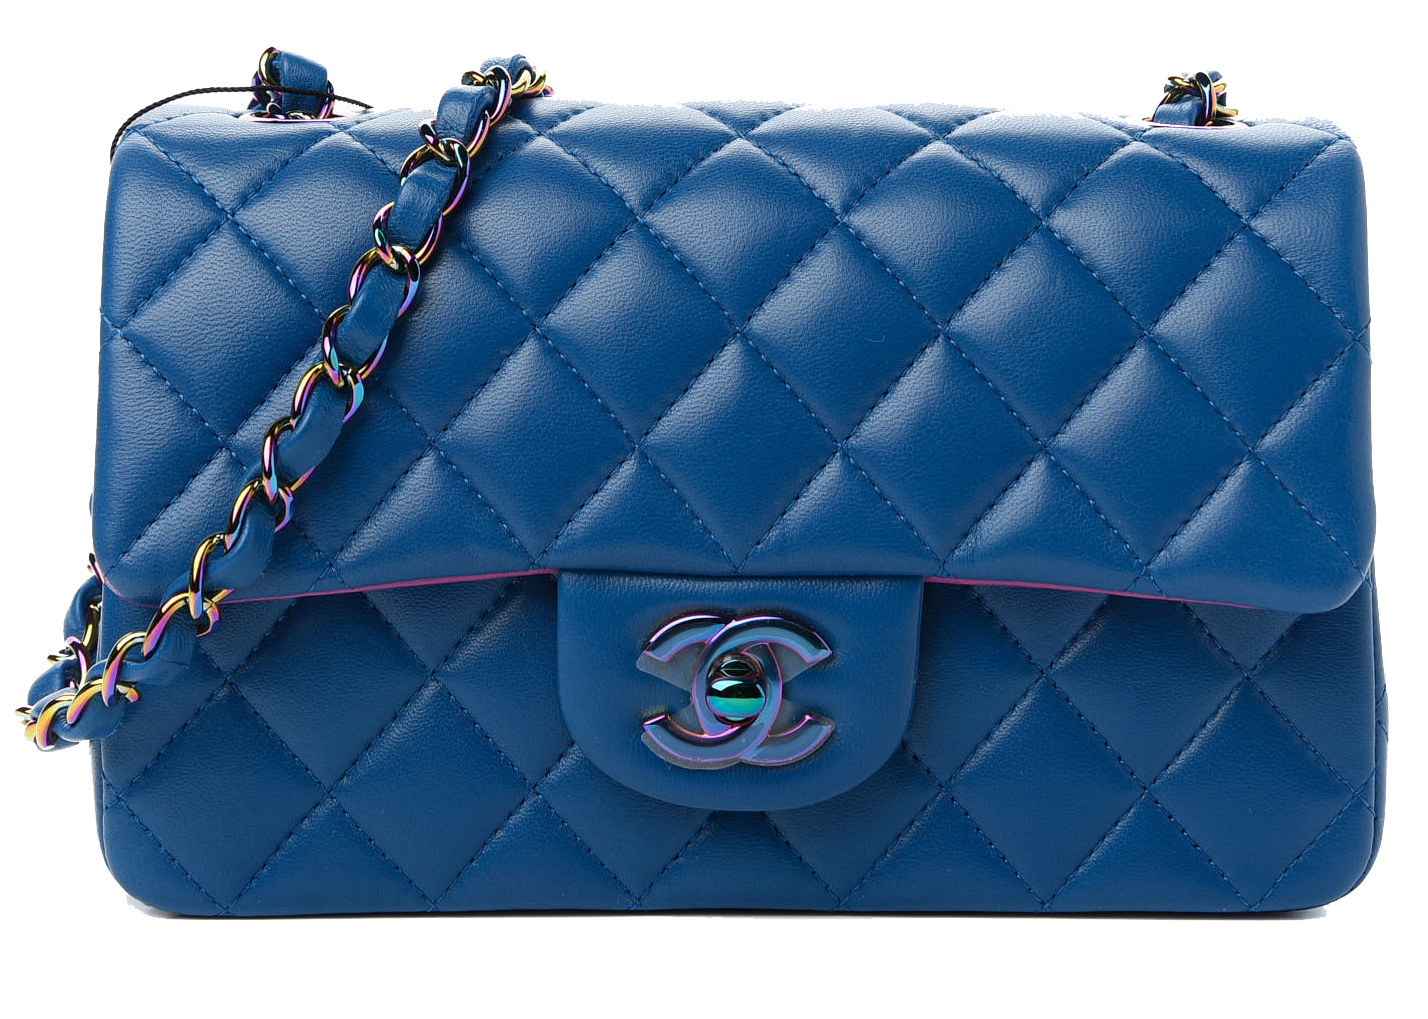 Chanel Blue Quilted Patent Leather Classic Rectangular Mini Flap Bag   Yoogis Closet